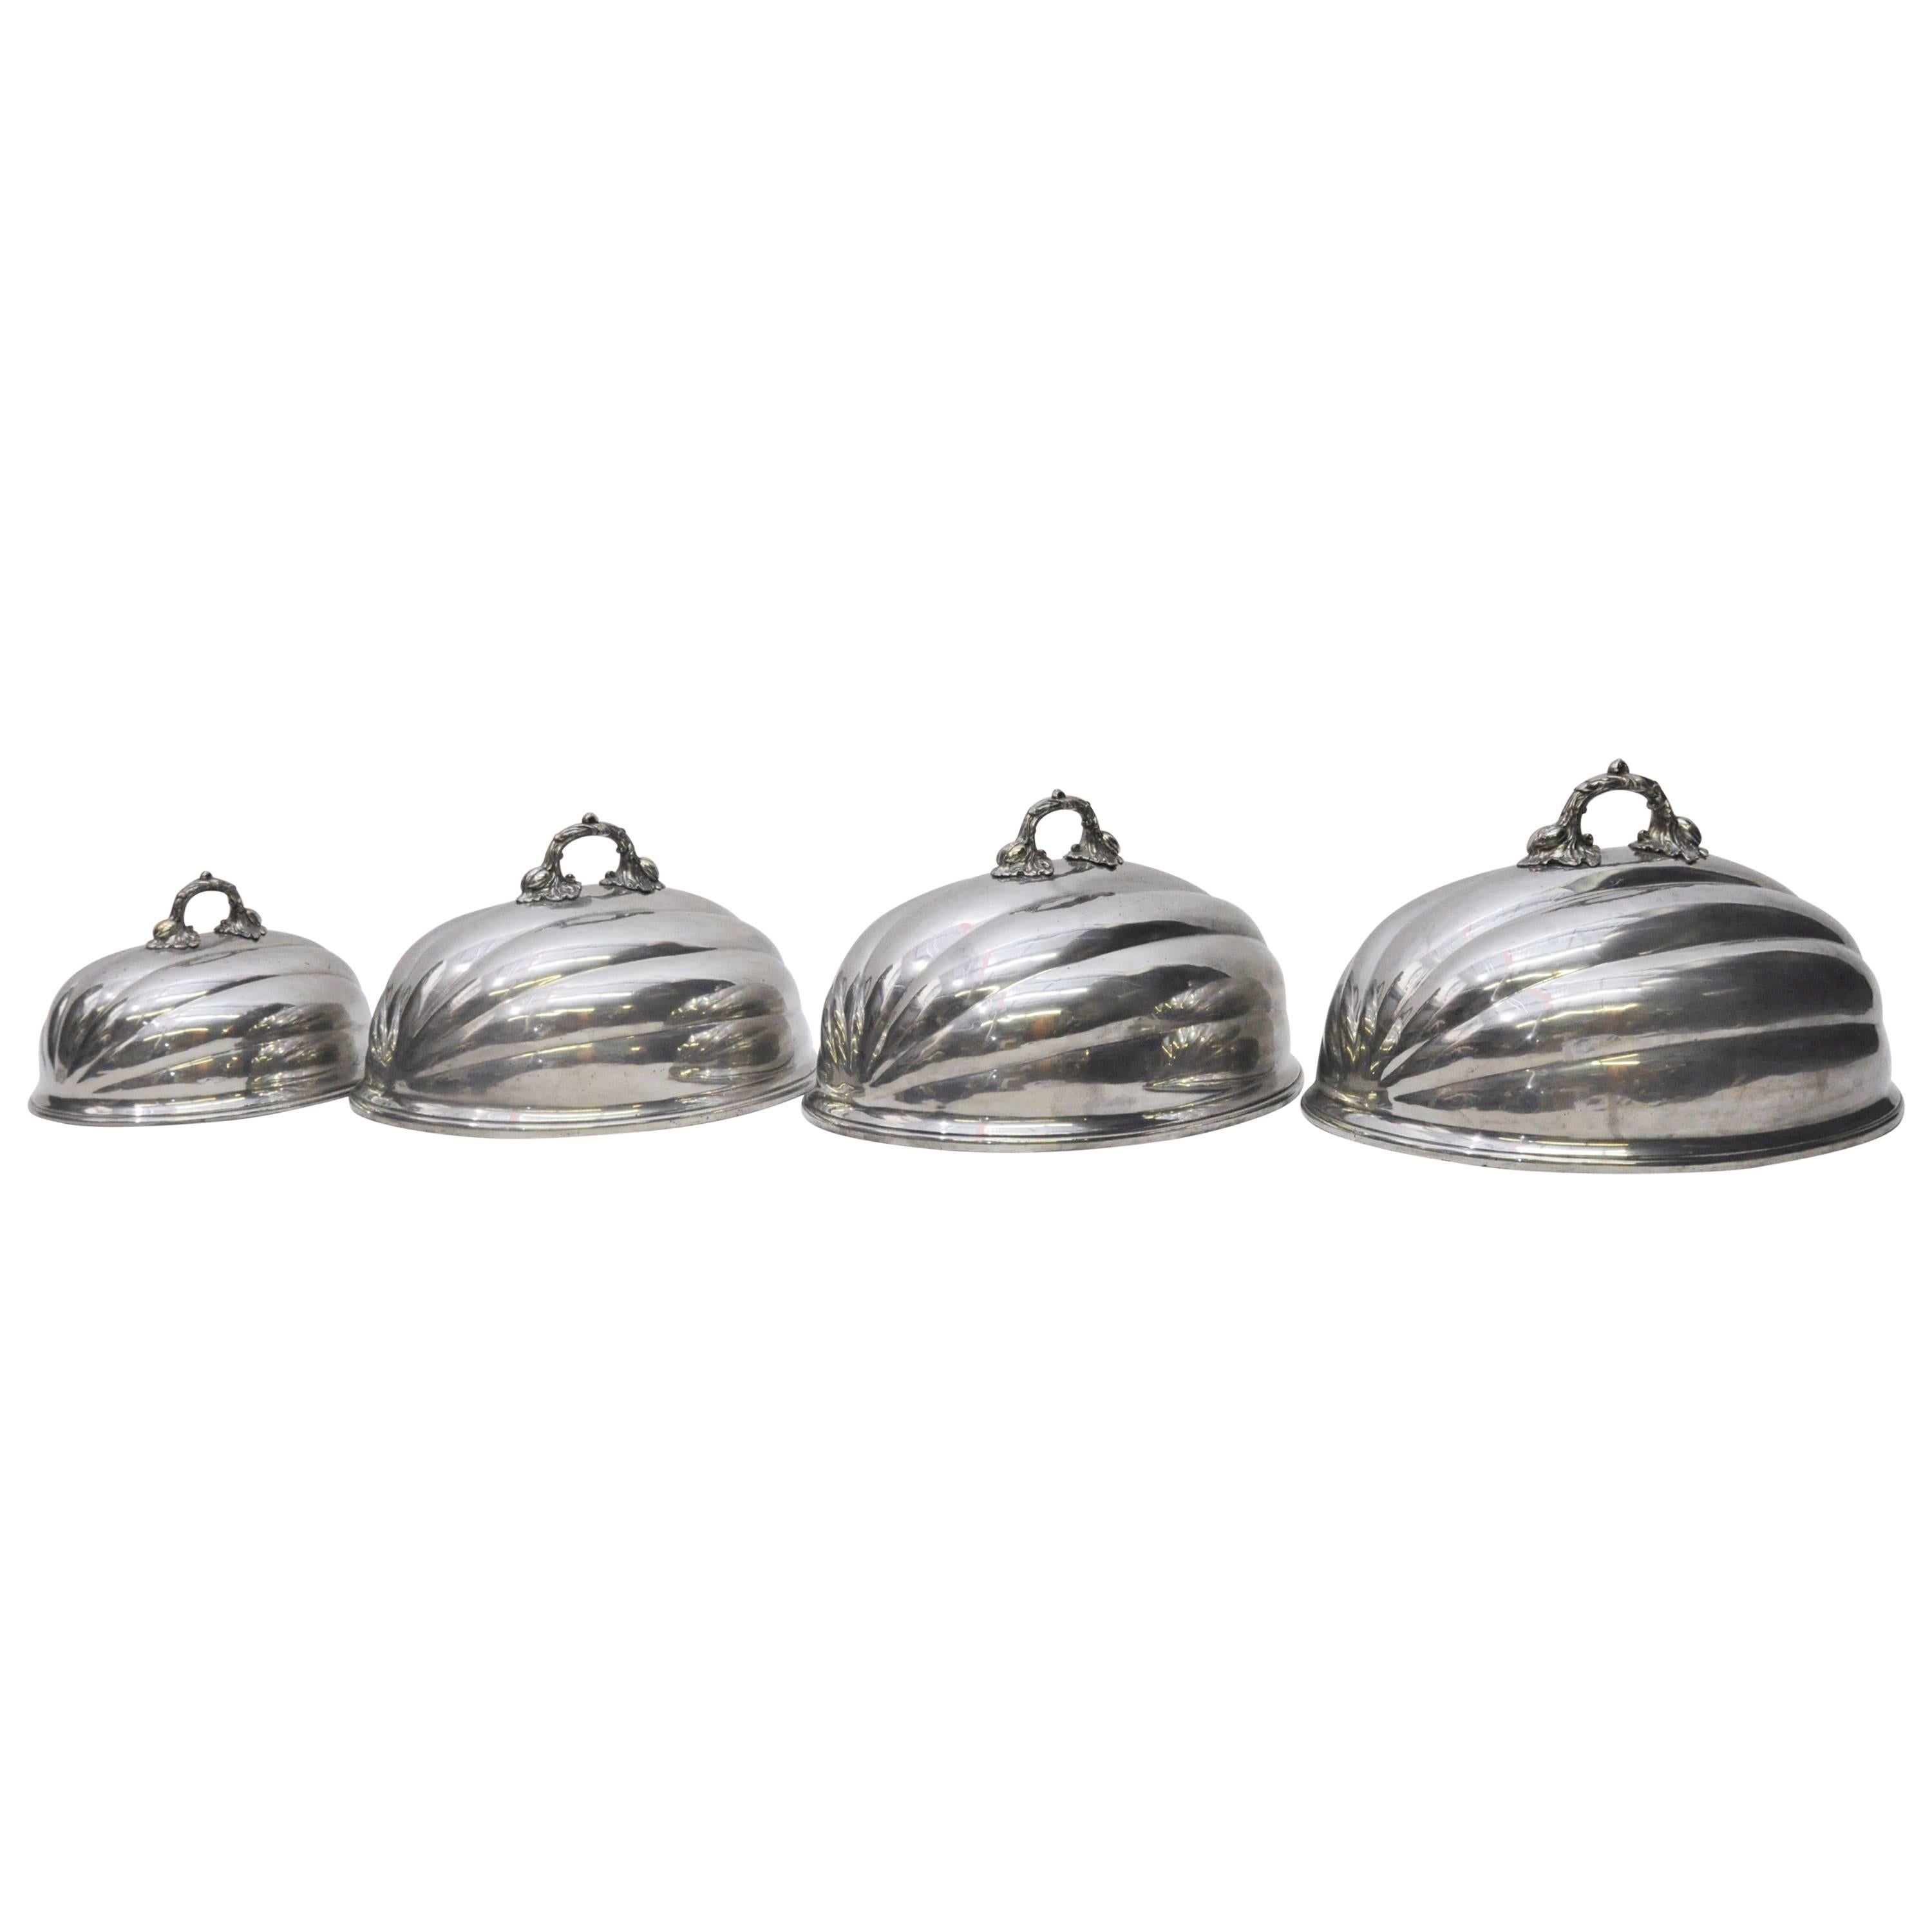 Set of Four Victorian English Graduated Size Meat and Food Domes by James Dixon For Sale